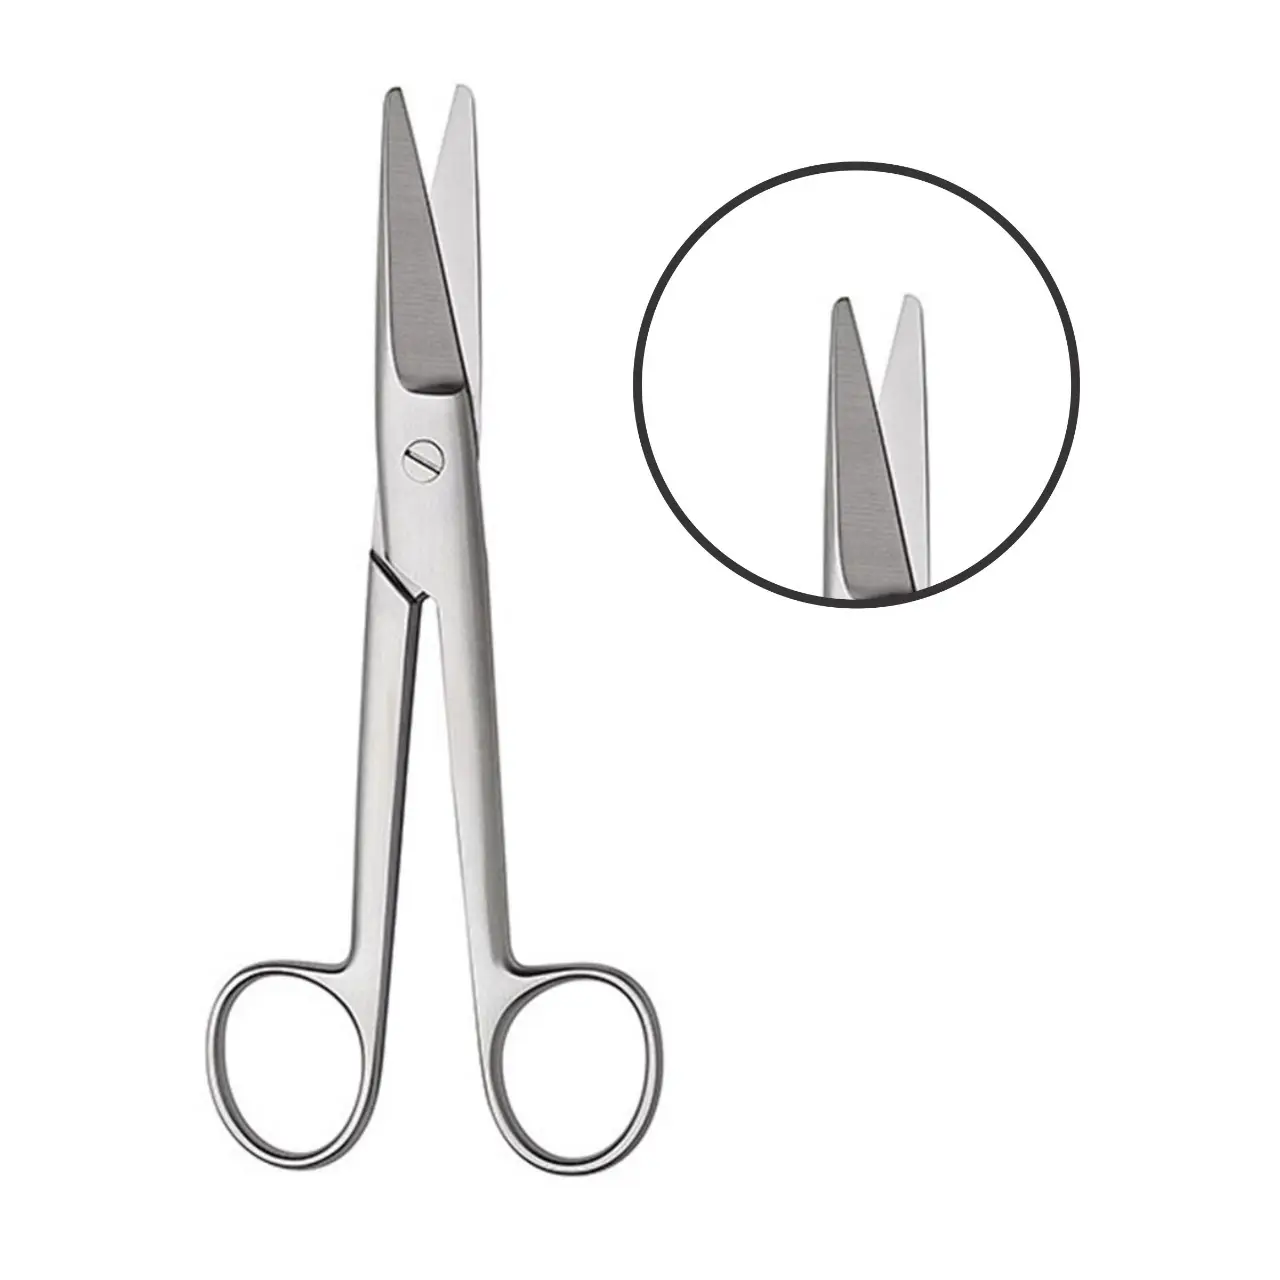 Mayo-Noble Dissecting Scissors High quality German Stainless Steel Straight & Curved Supercut surgery scissors K.T Surgico